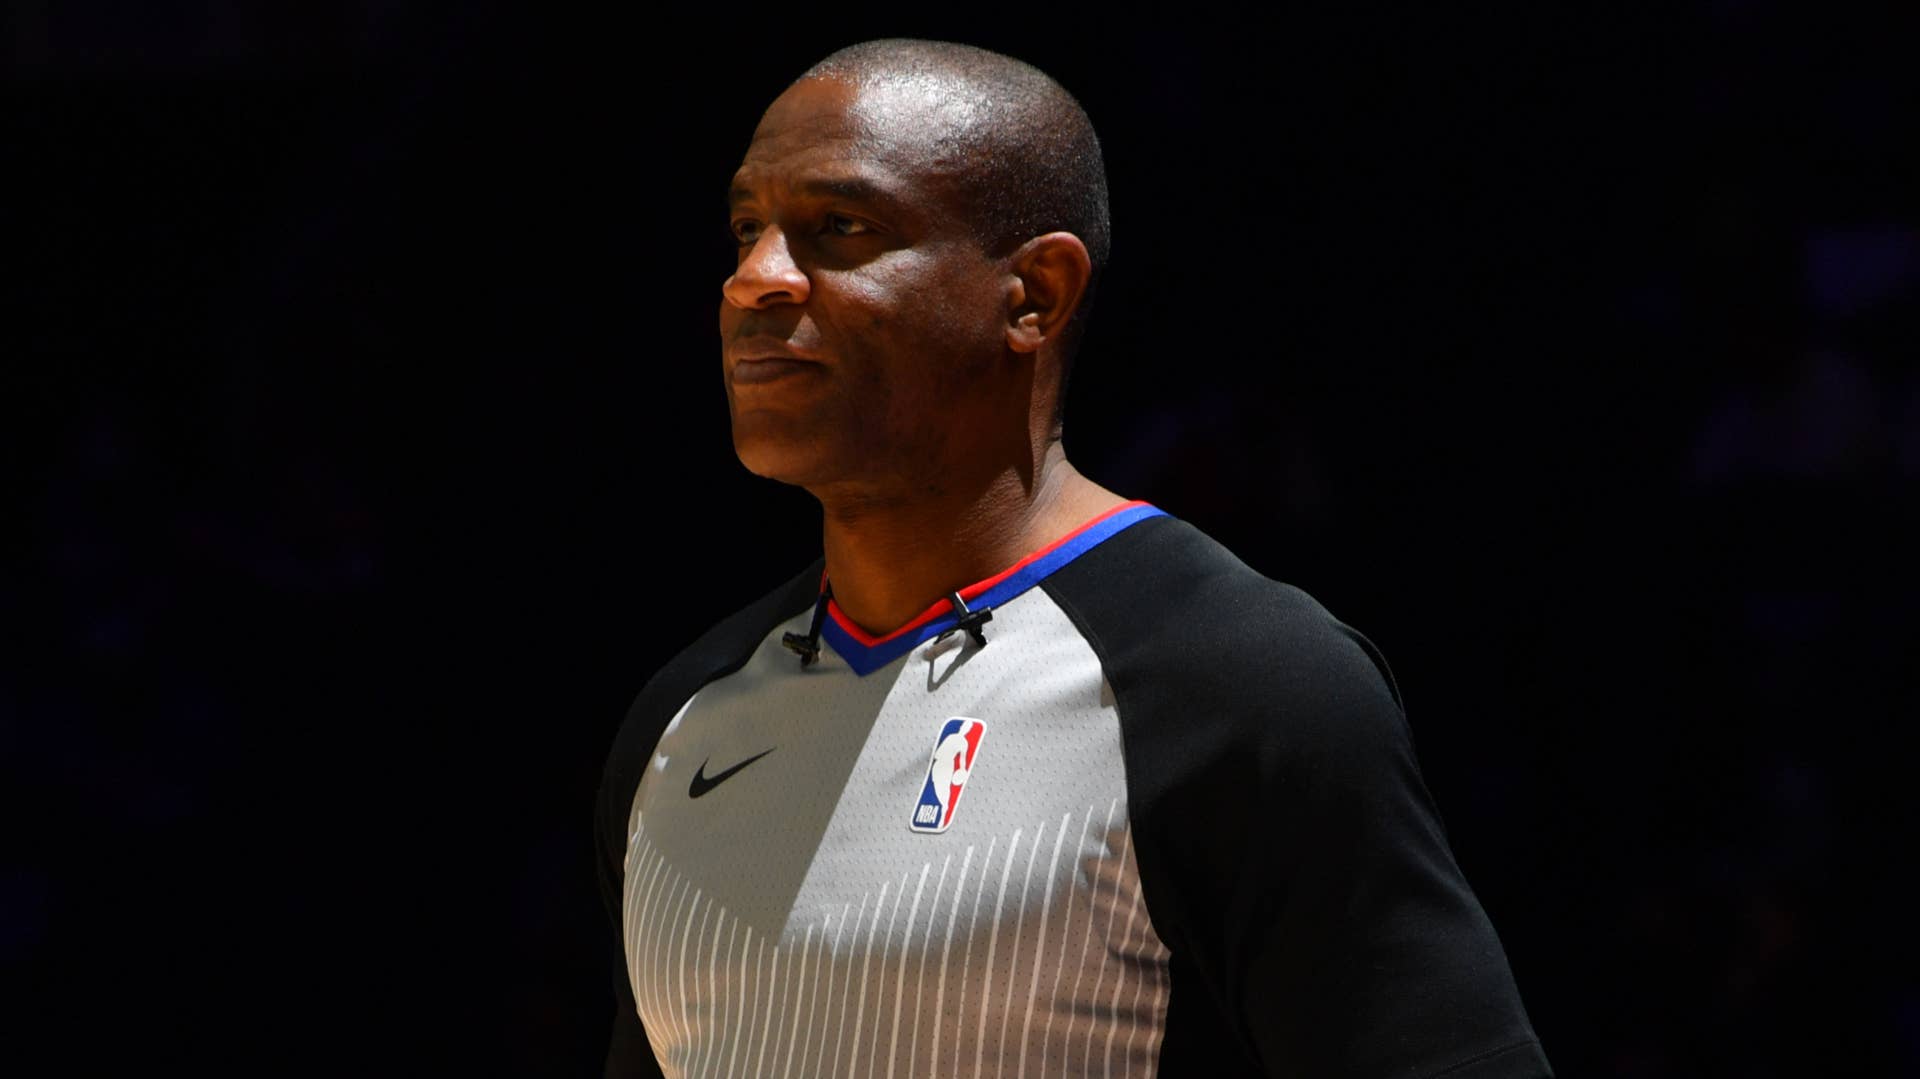 NBA Referee Tony Brown looks on during a game.